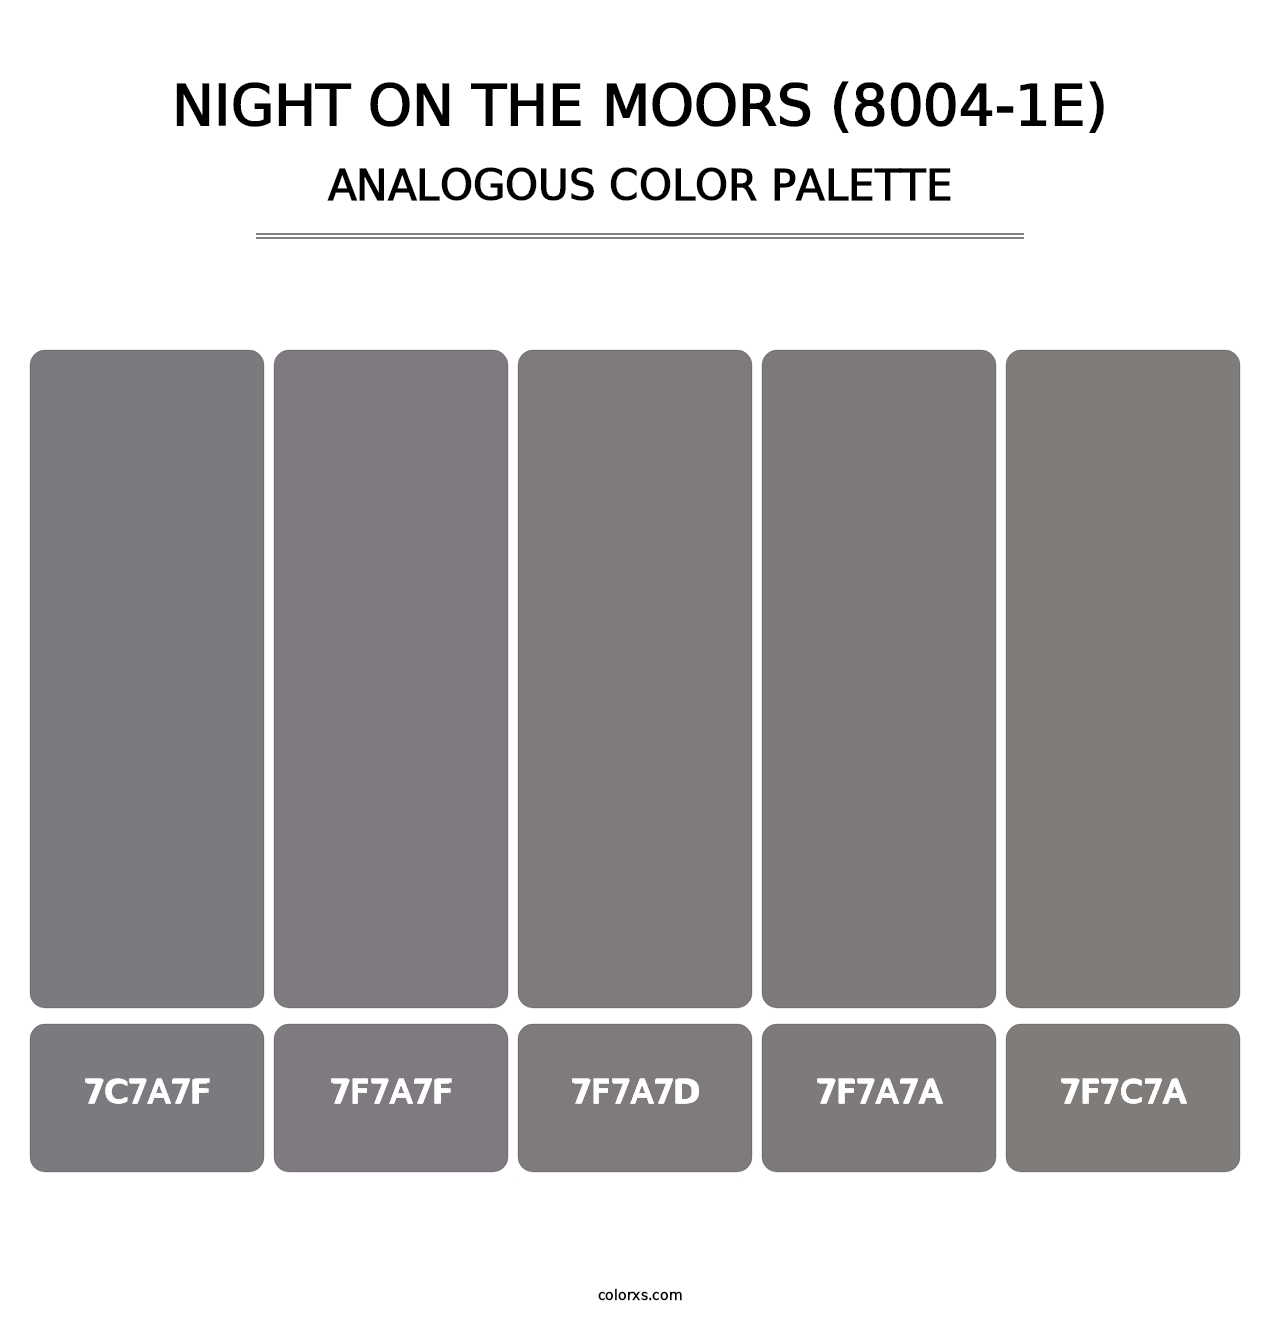 Night on the Moors (8004-1E) - Analogous Color Palette